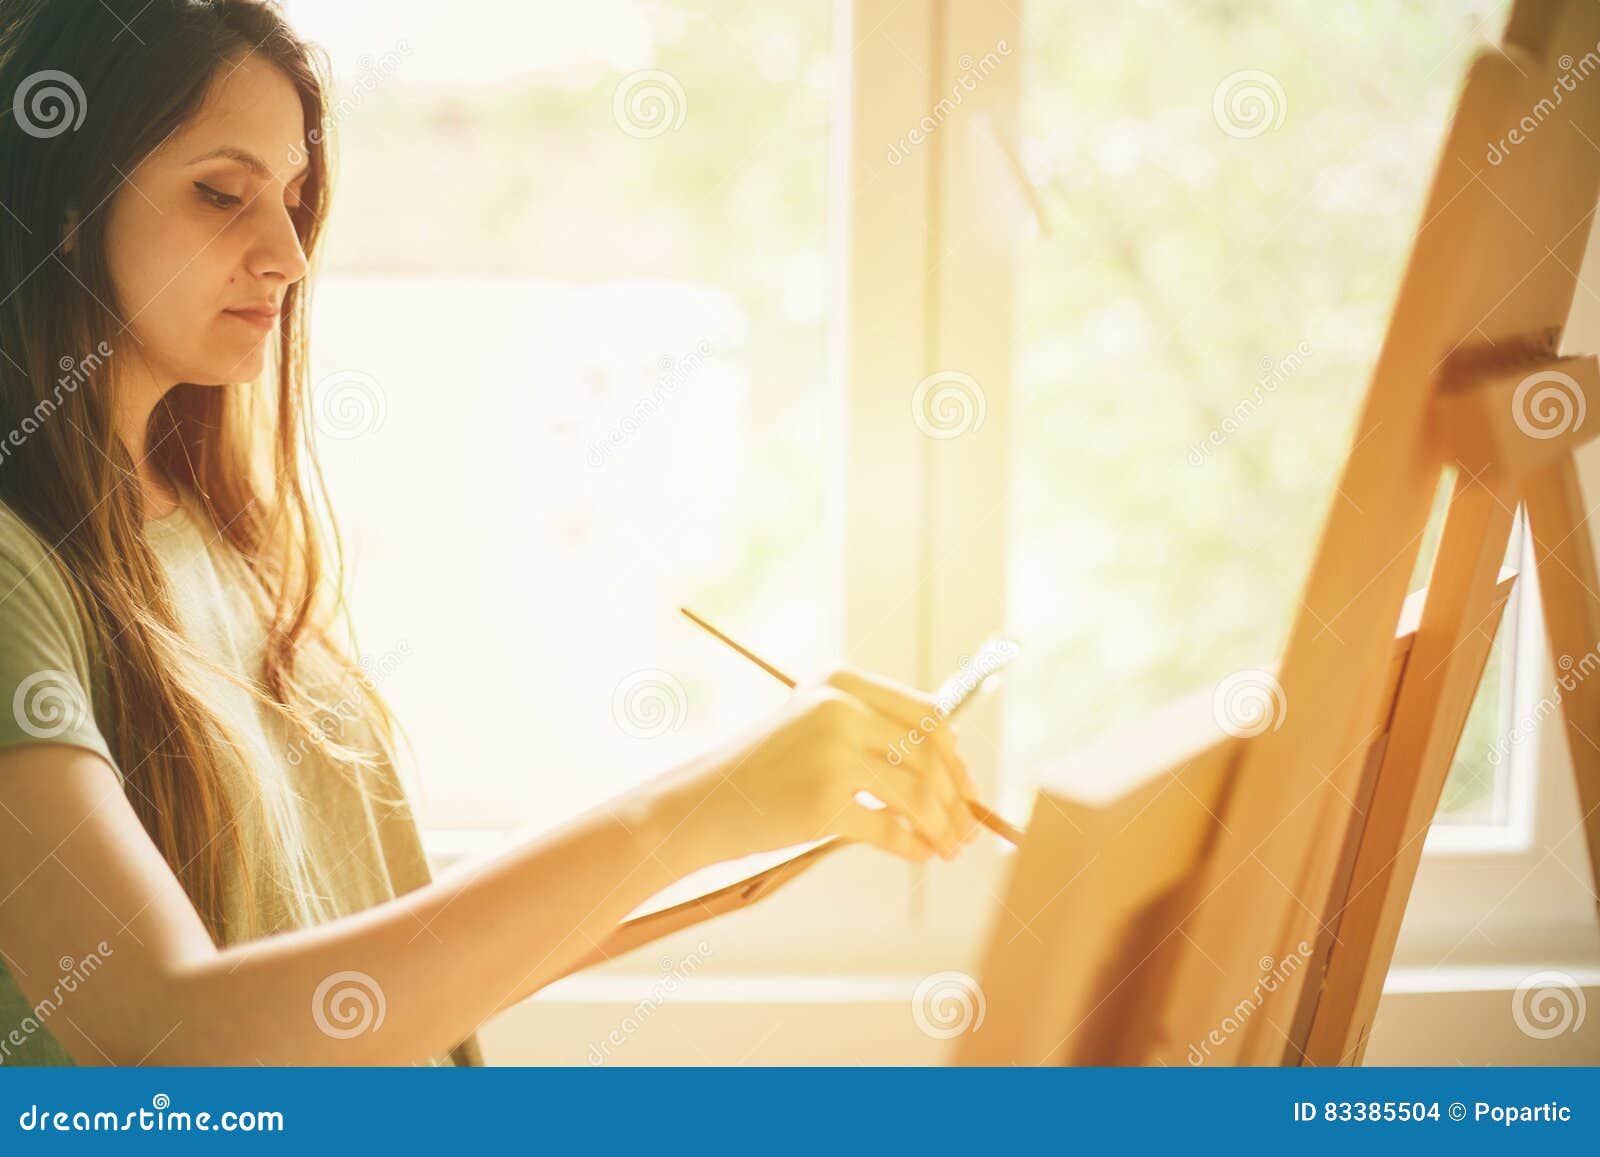 Young Female Artist Painting on Canvas Stock Photo - Image of light ...